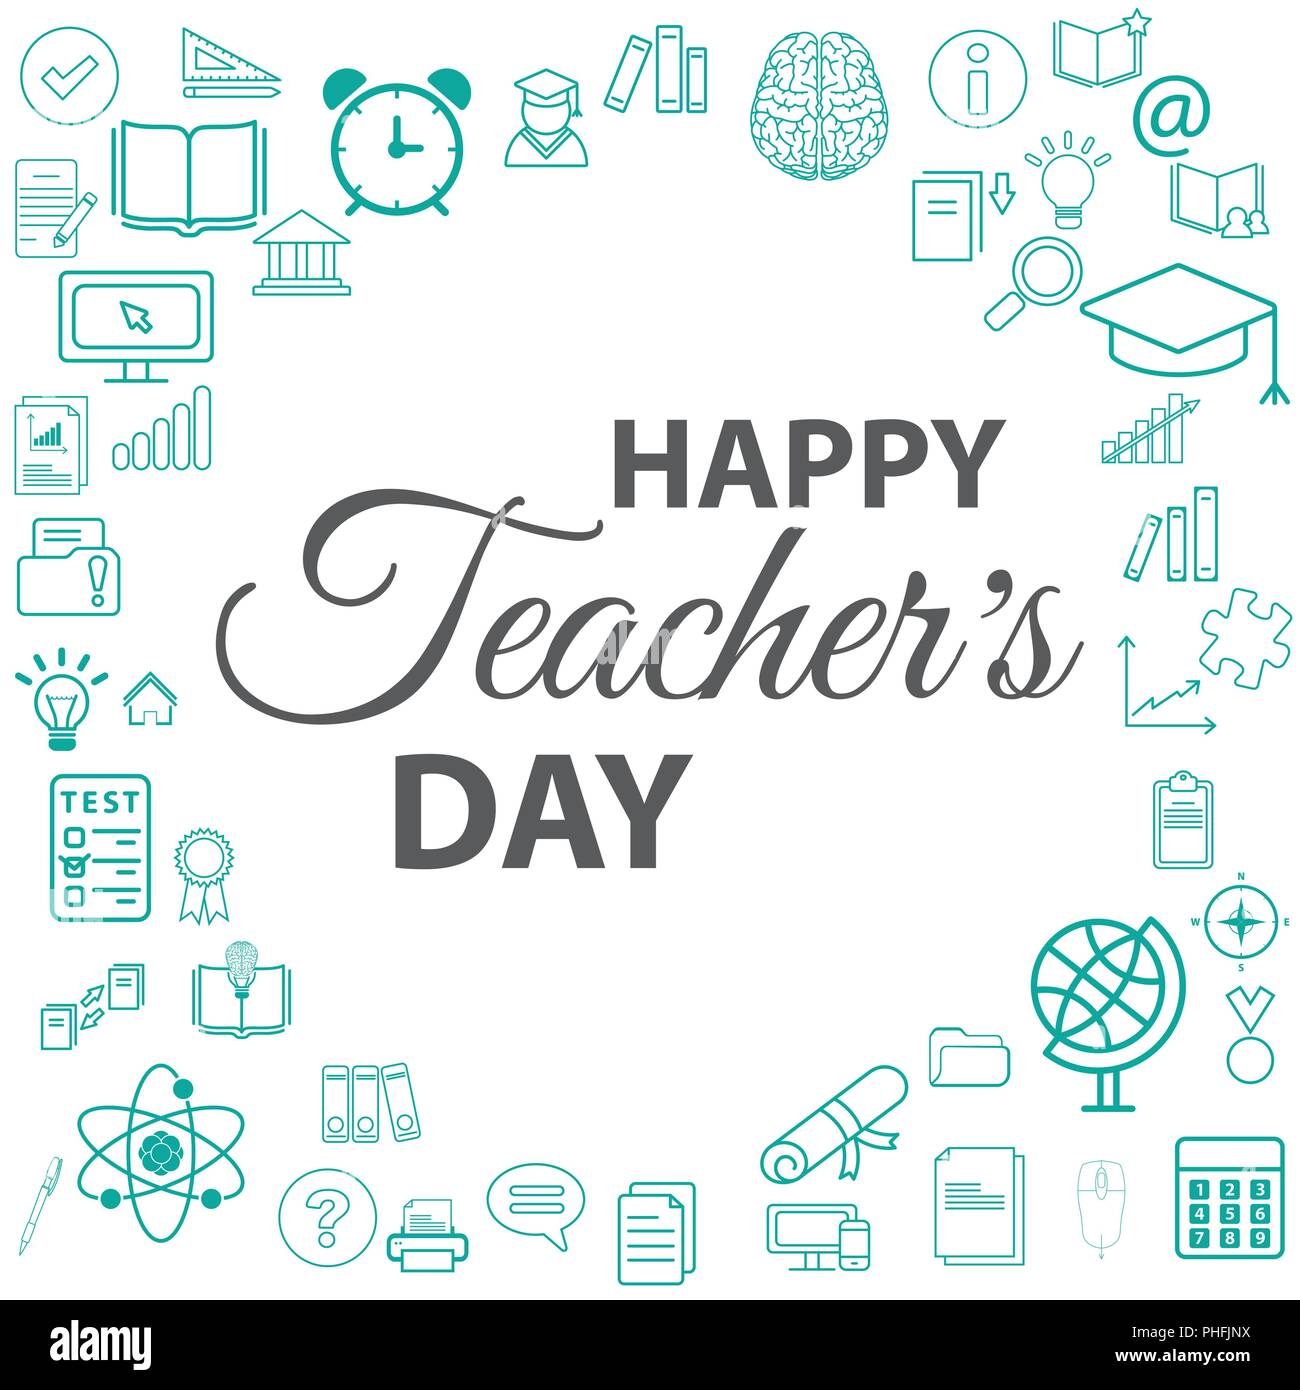 creative abstract, banner or poster for Happy Teacher's Day with ...